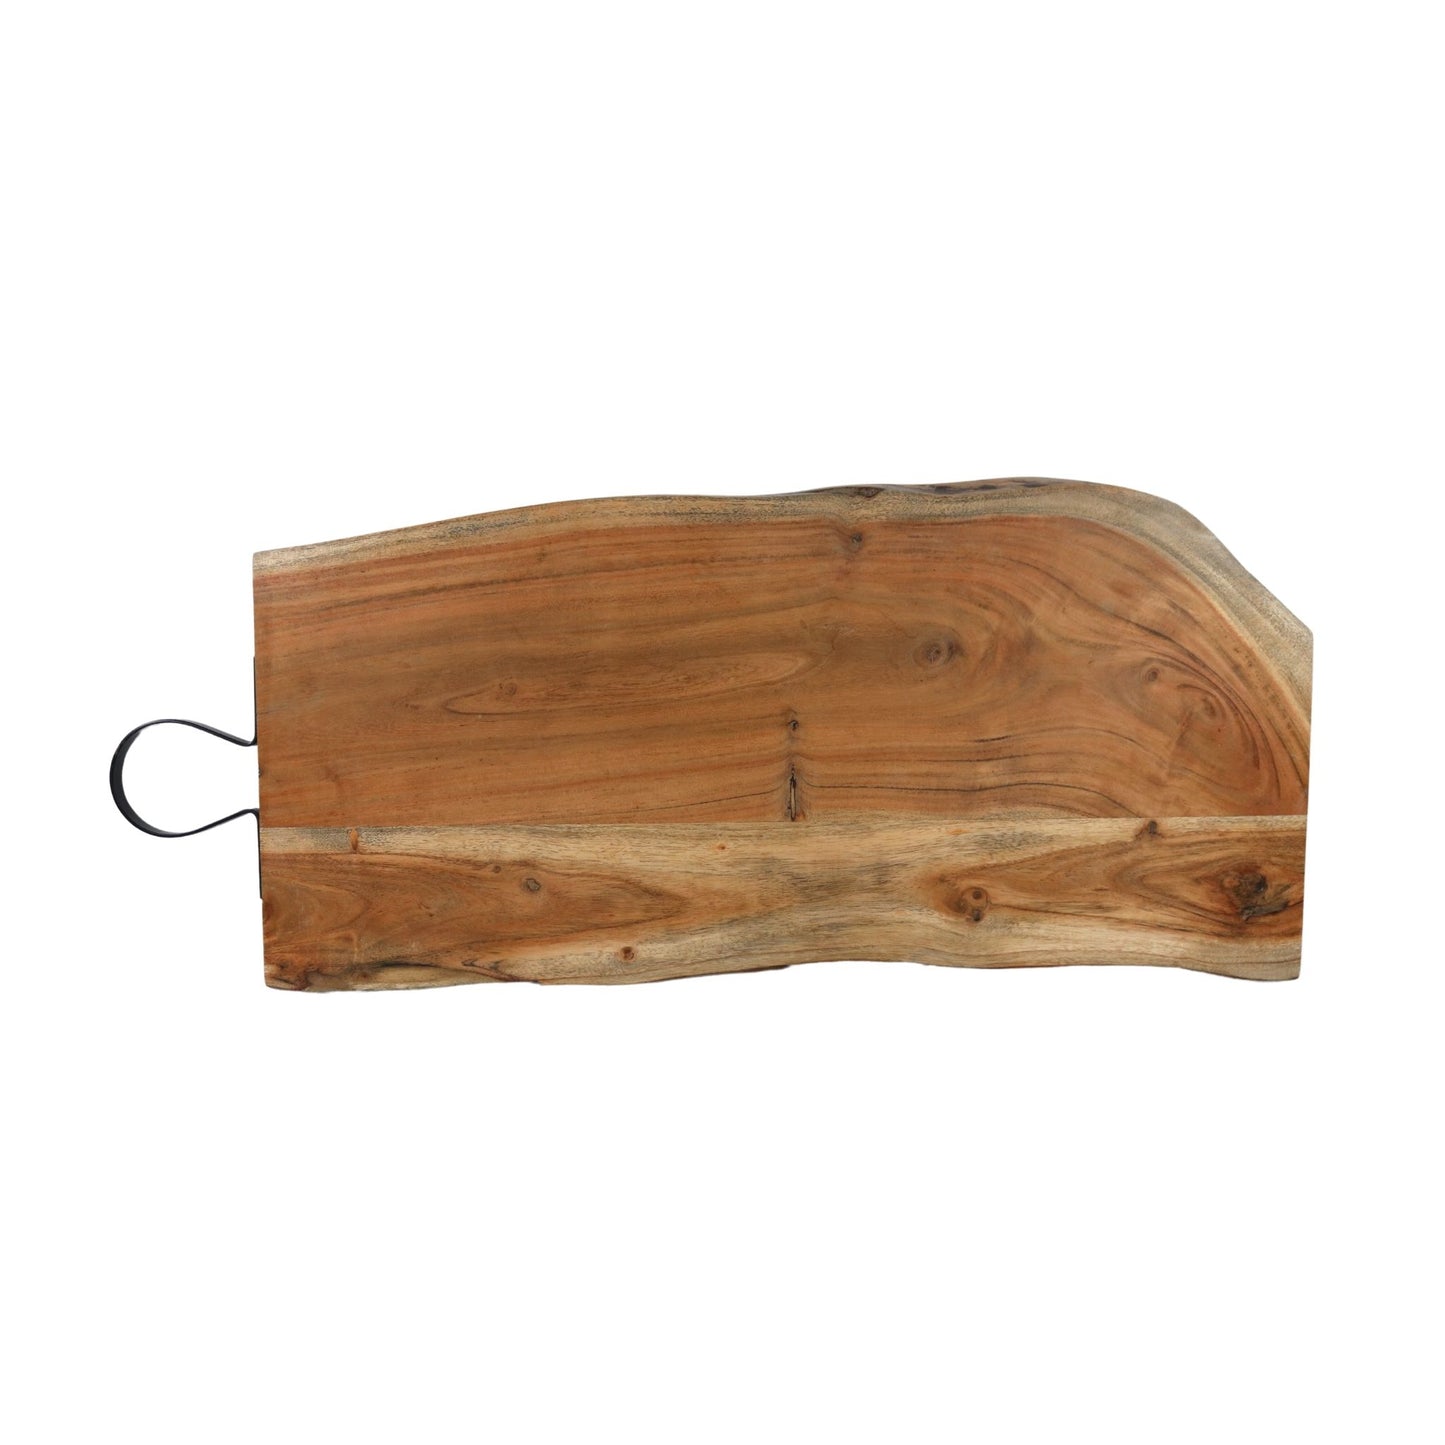 Wood Serving Tray with Metal Handle